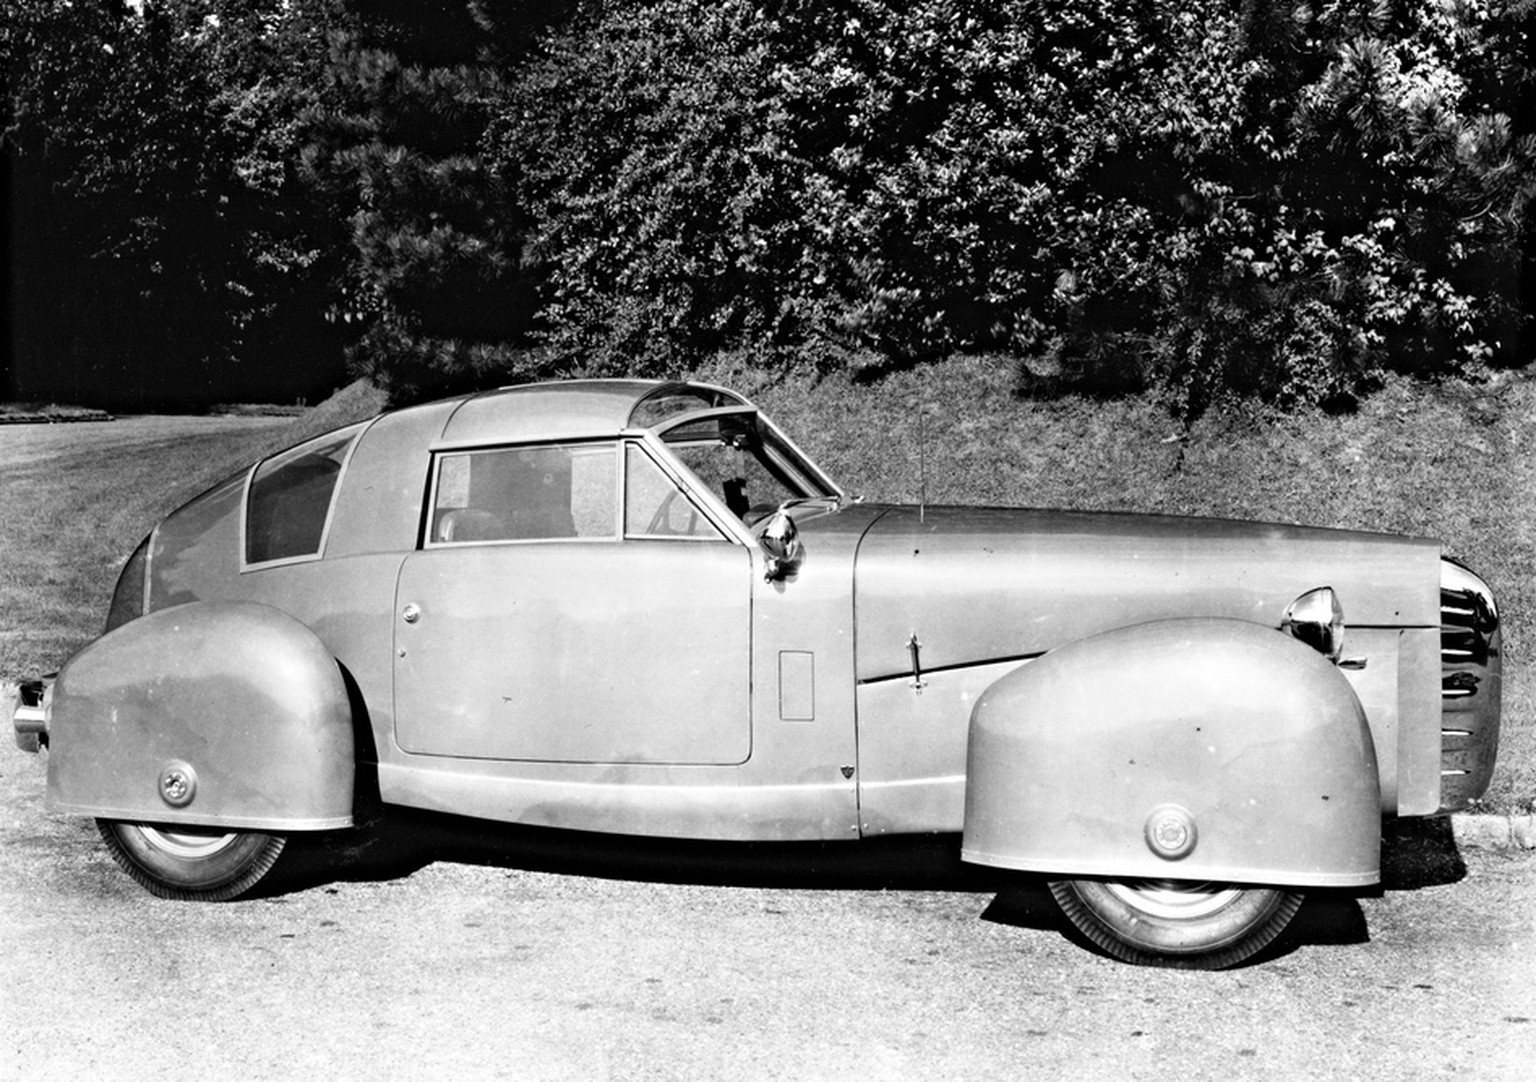 1948 Tasco was made under a short-lived brand called The American Sports Car Company 
https://www.flickr.com/photos/autohistorian/20986424718